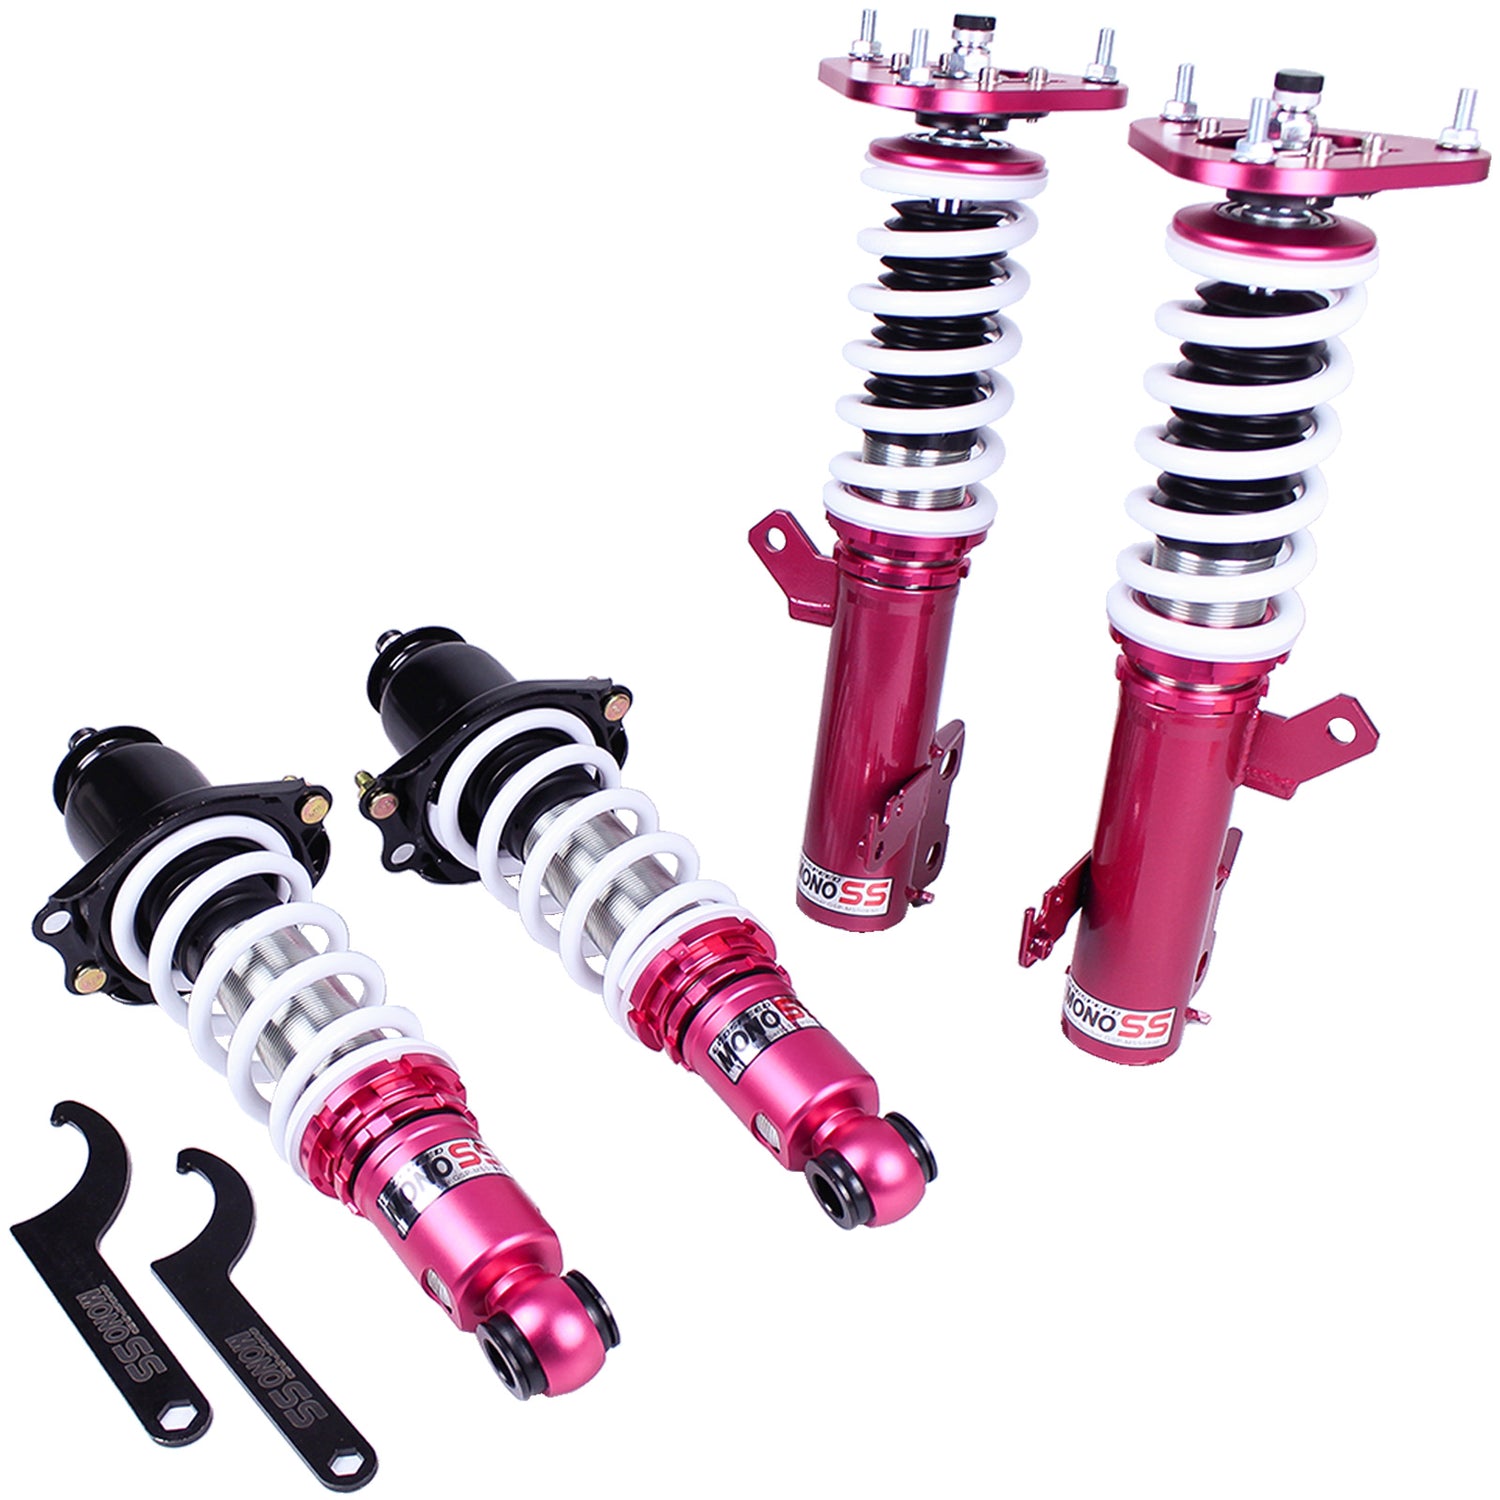 Godspeed MSS0890-B MonoSS Coilover Lowering Kit, Fully Adjustable, Ride Height, Spring Tension And 16 Click Damping, Toyota Matrix(E140) 2009-14